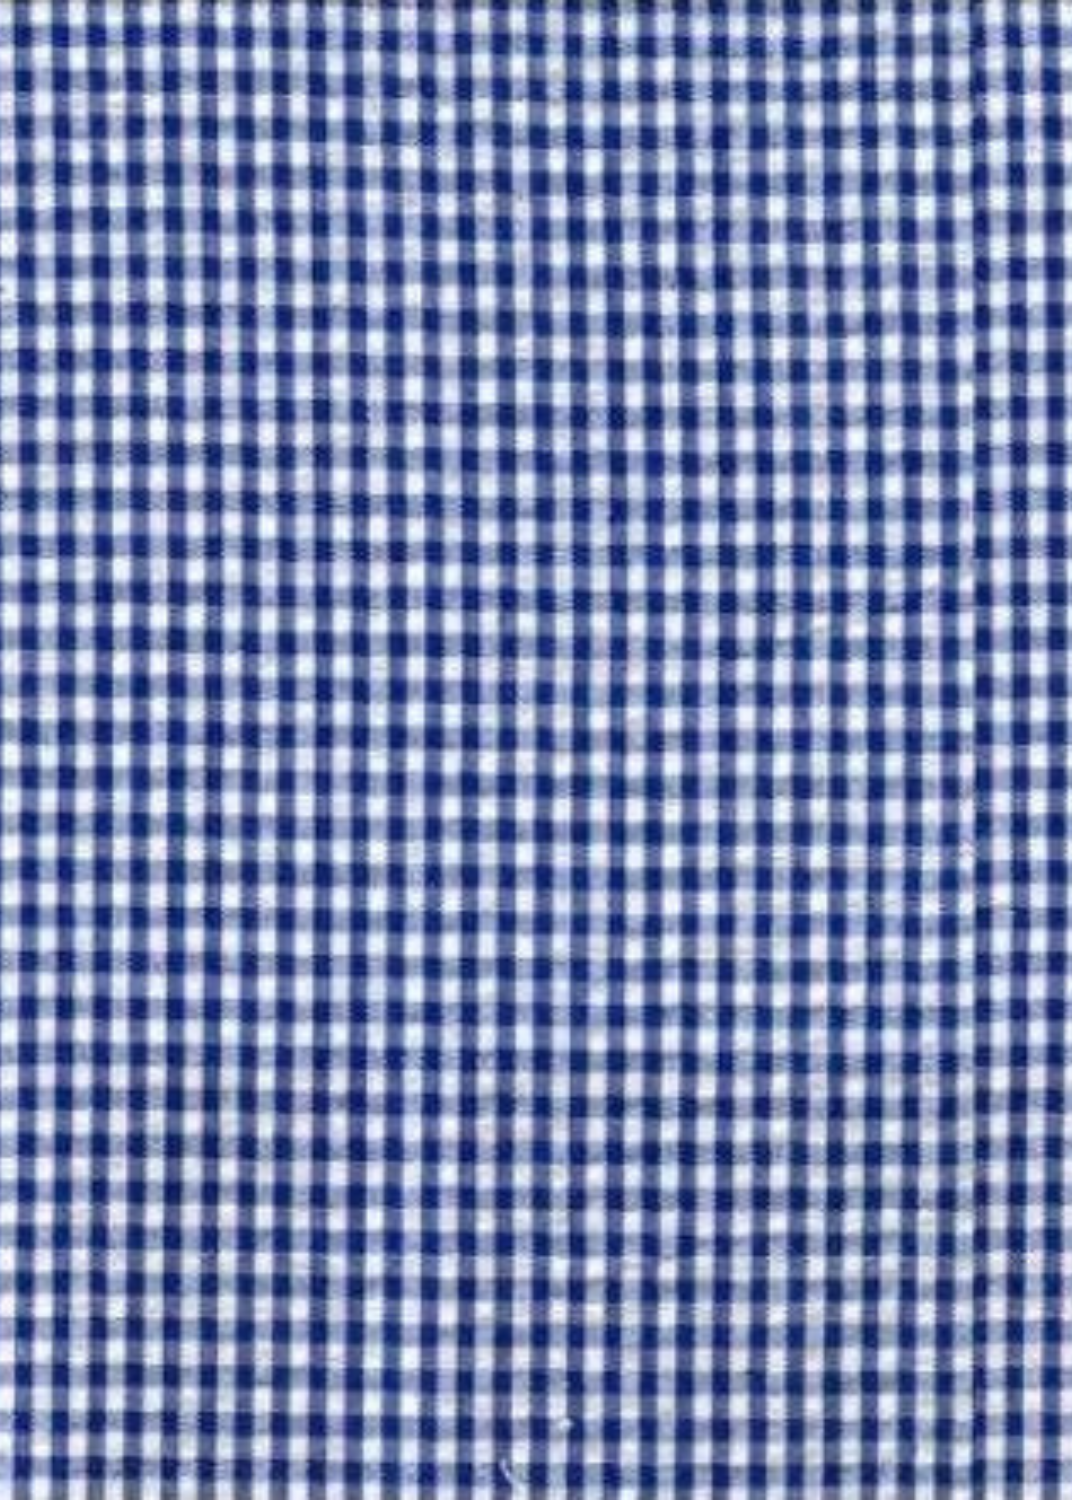 Placemat - Scalloped Edge, Blue Gingham Check/White